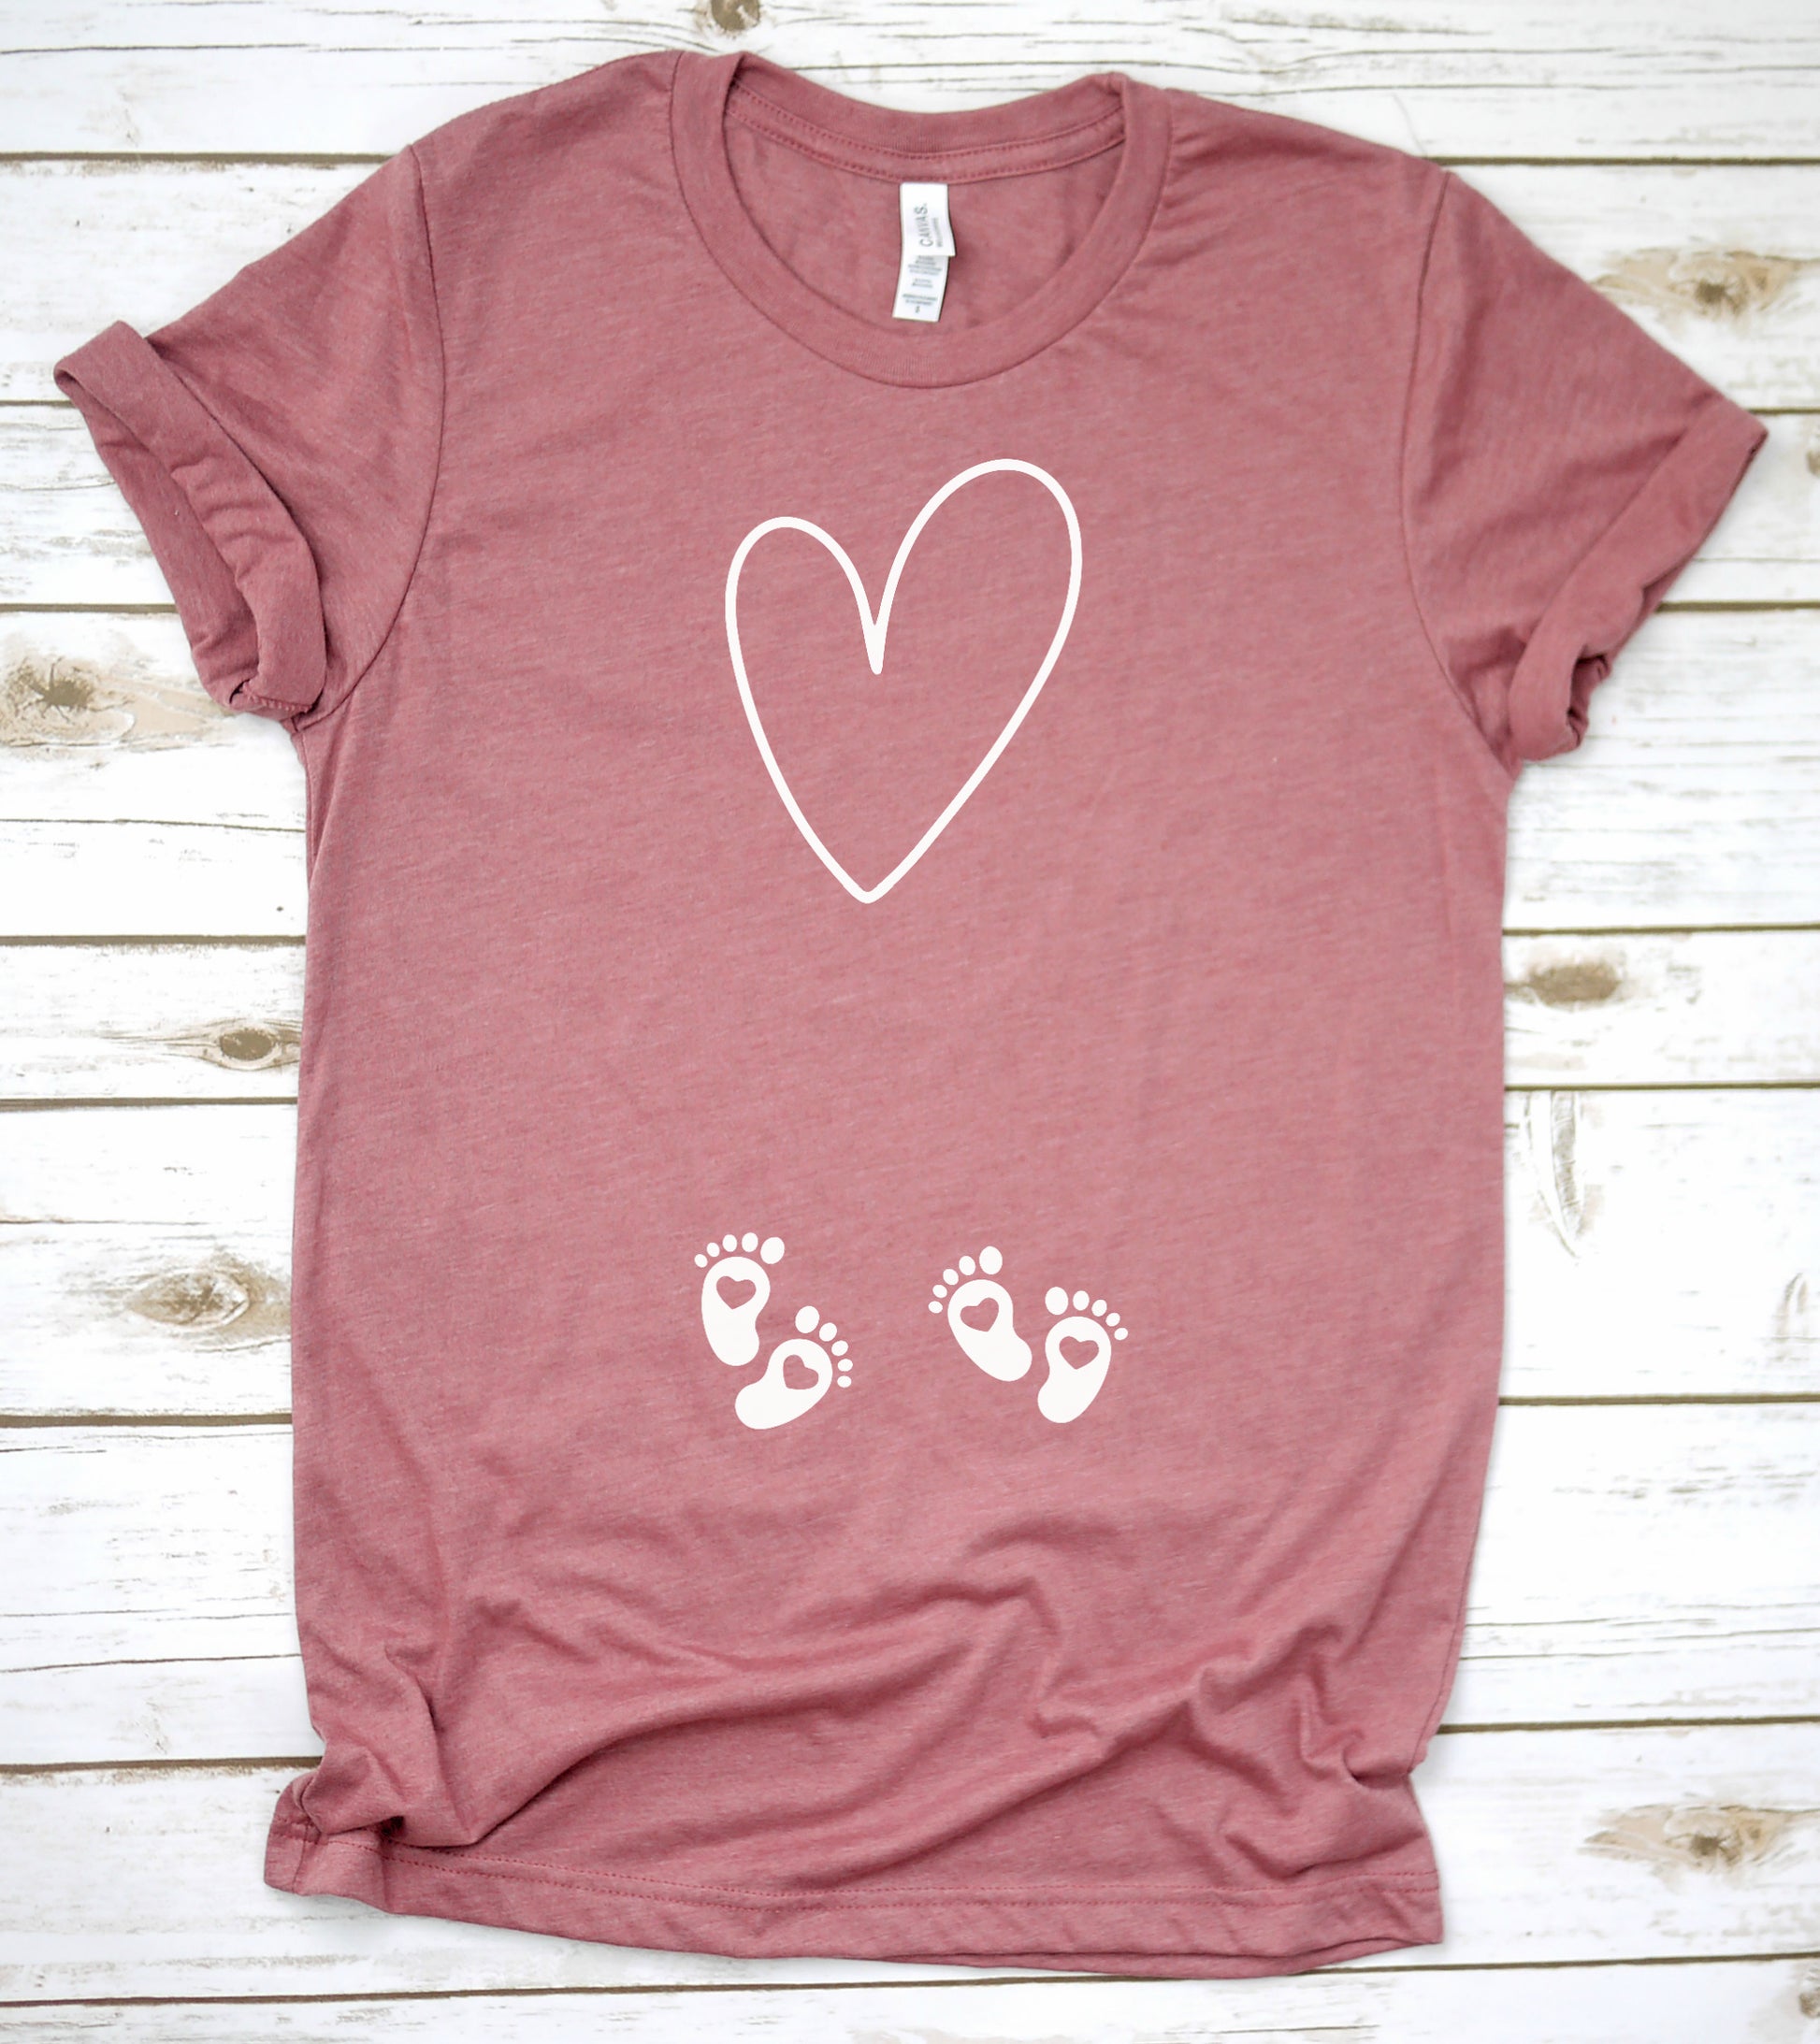 pregnancy reveal shirt twins, baby shower shirt twin mother